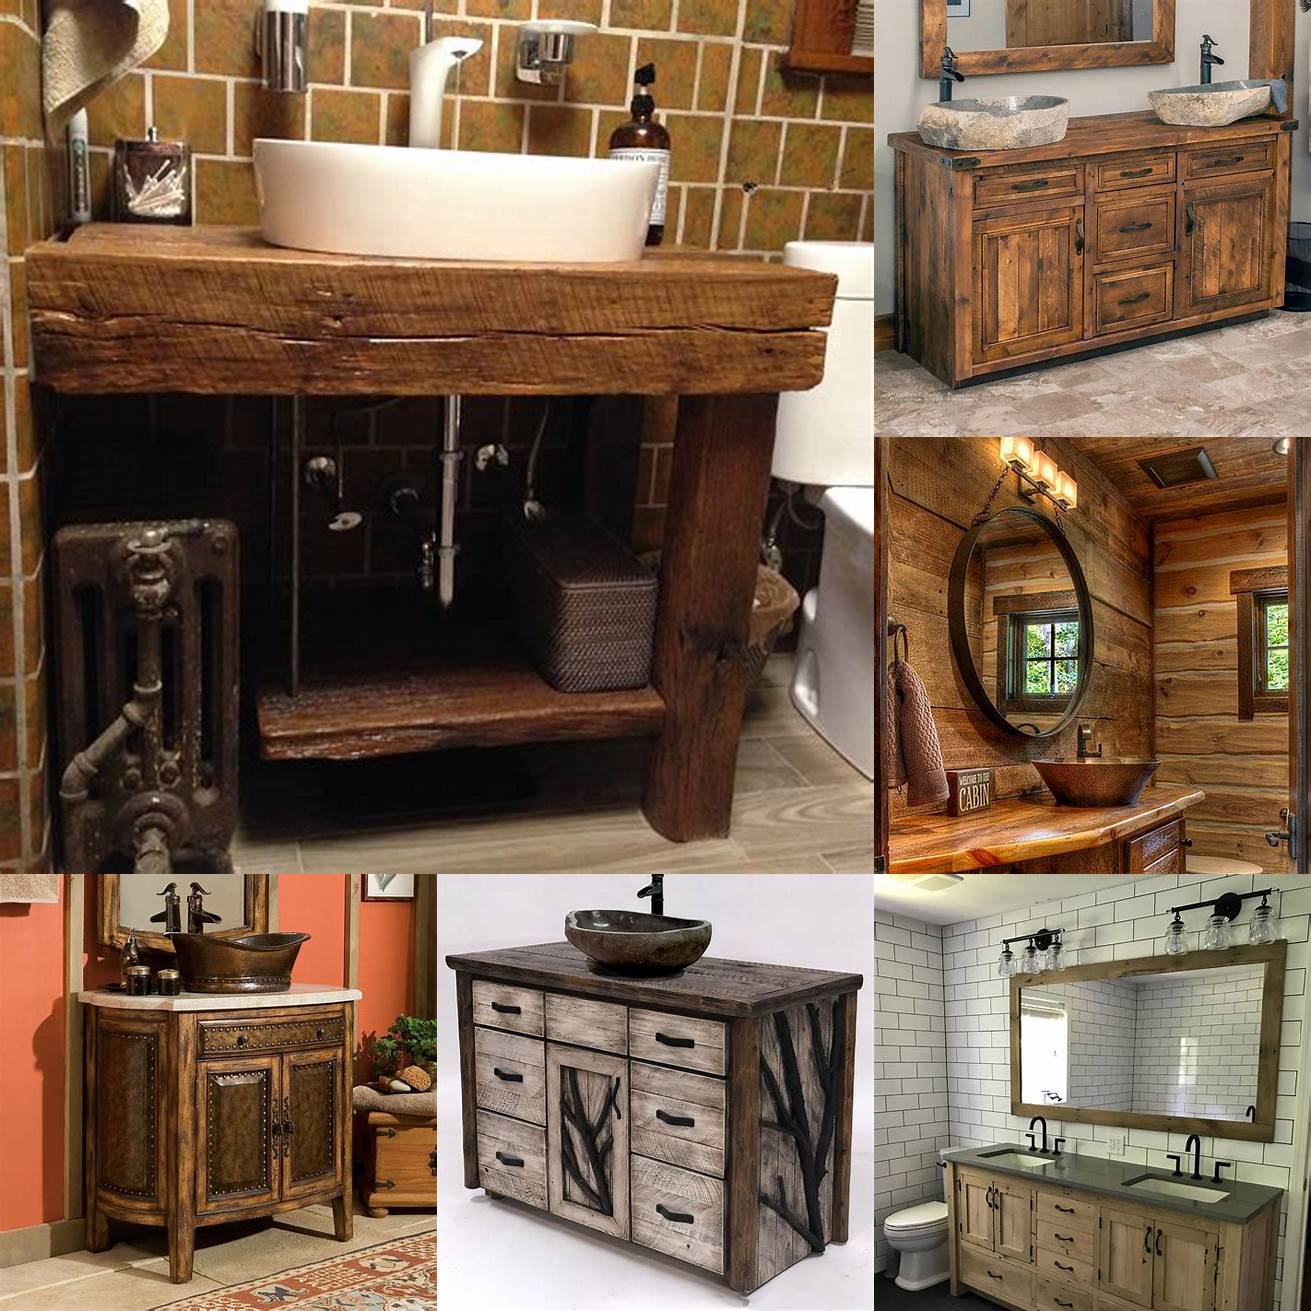 A rustic wood vanity brings warmth and character to your bathroom